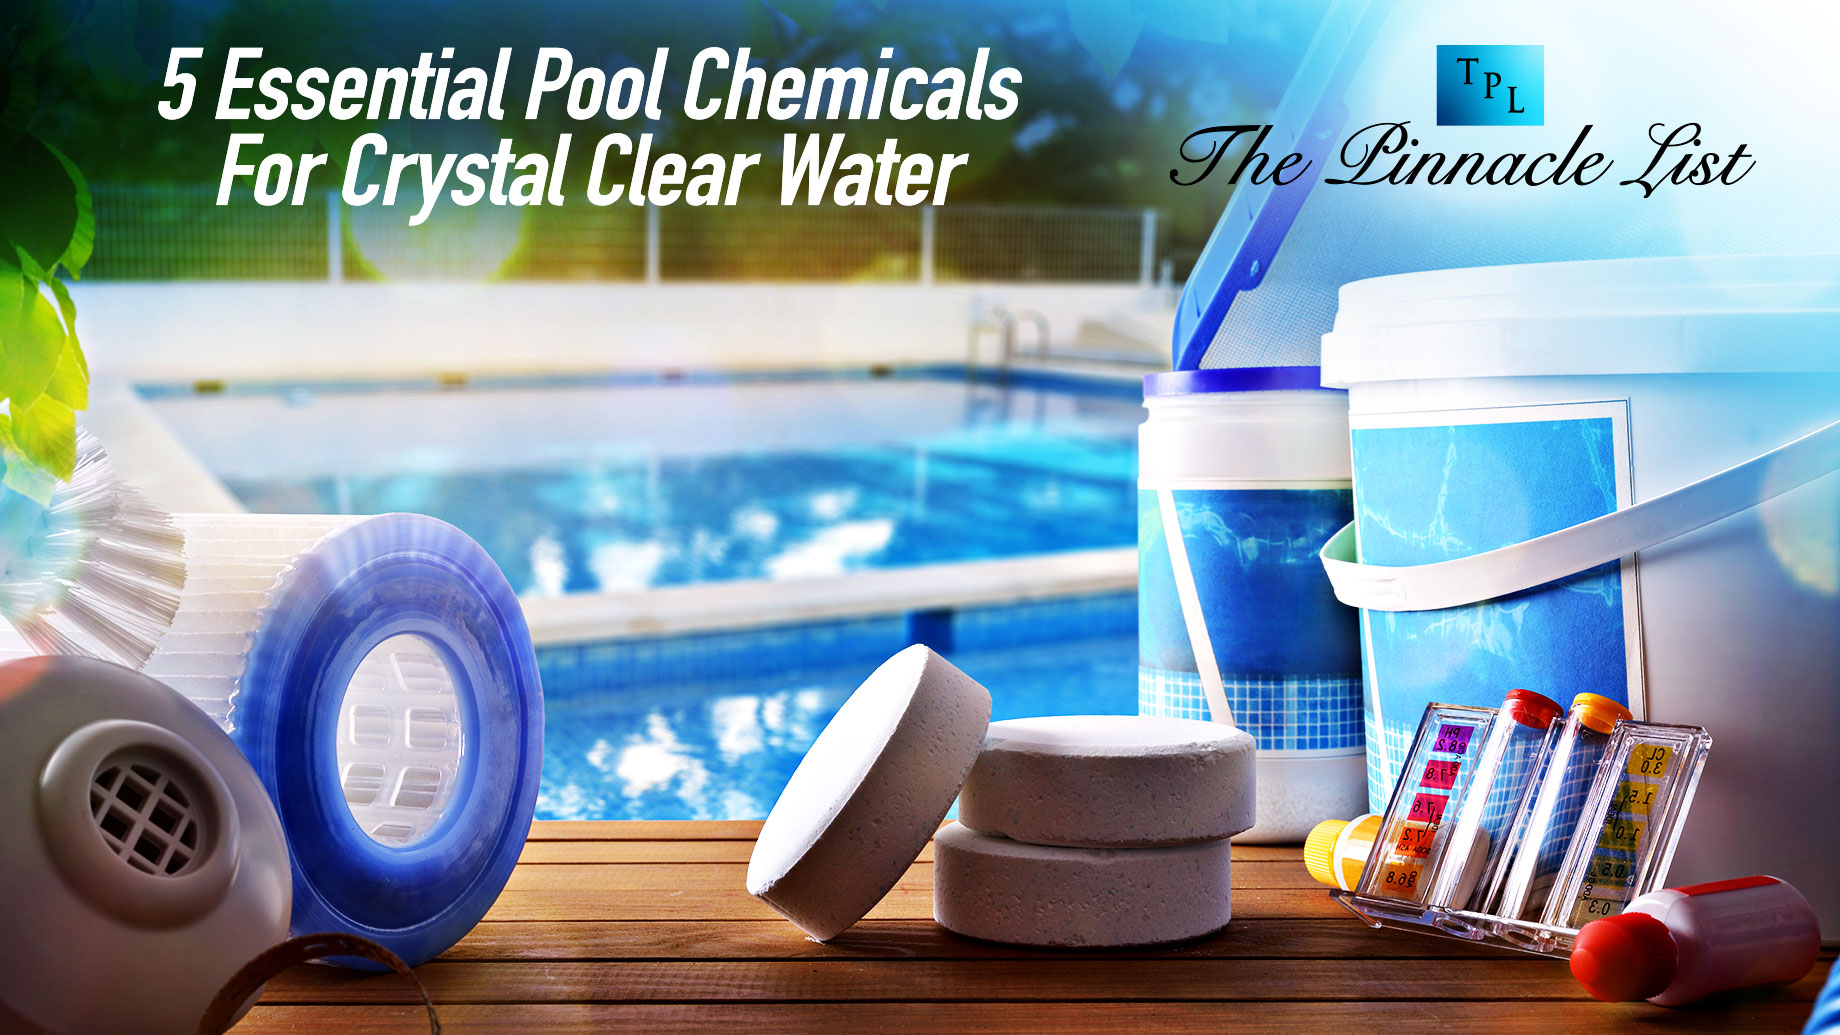 5 Essential Pool Chemicals For Crystal Clear Water